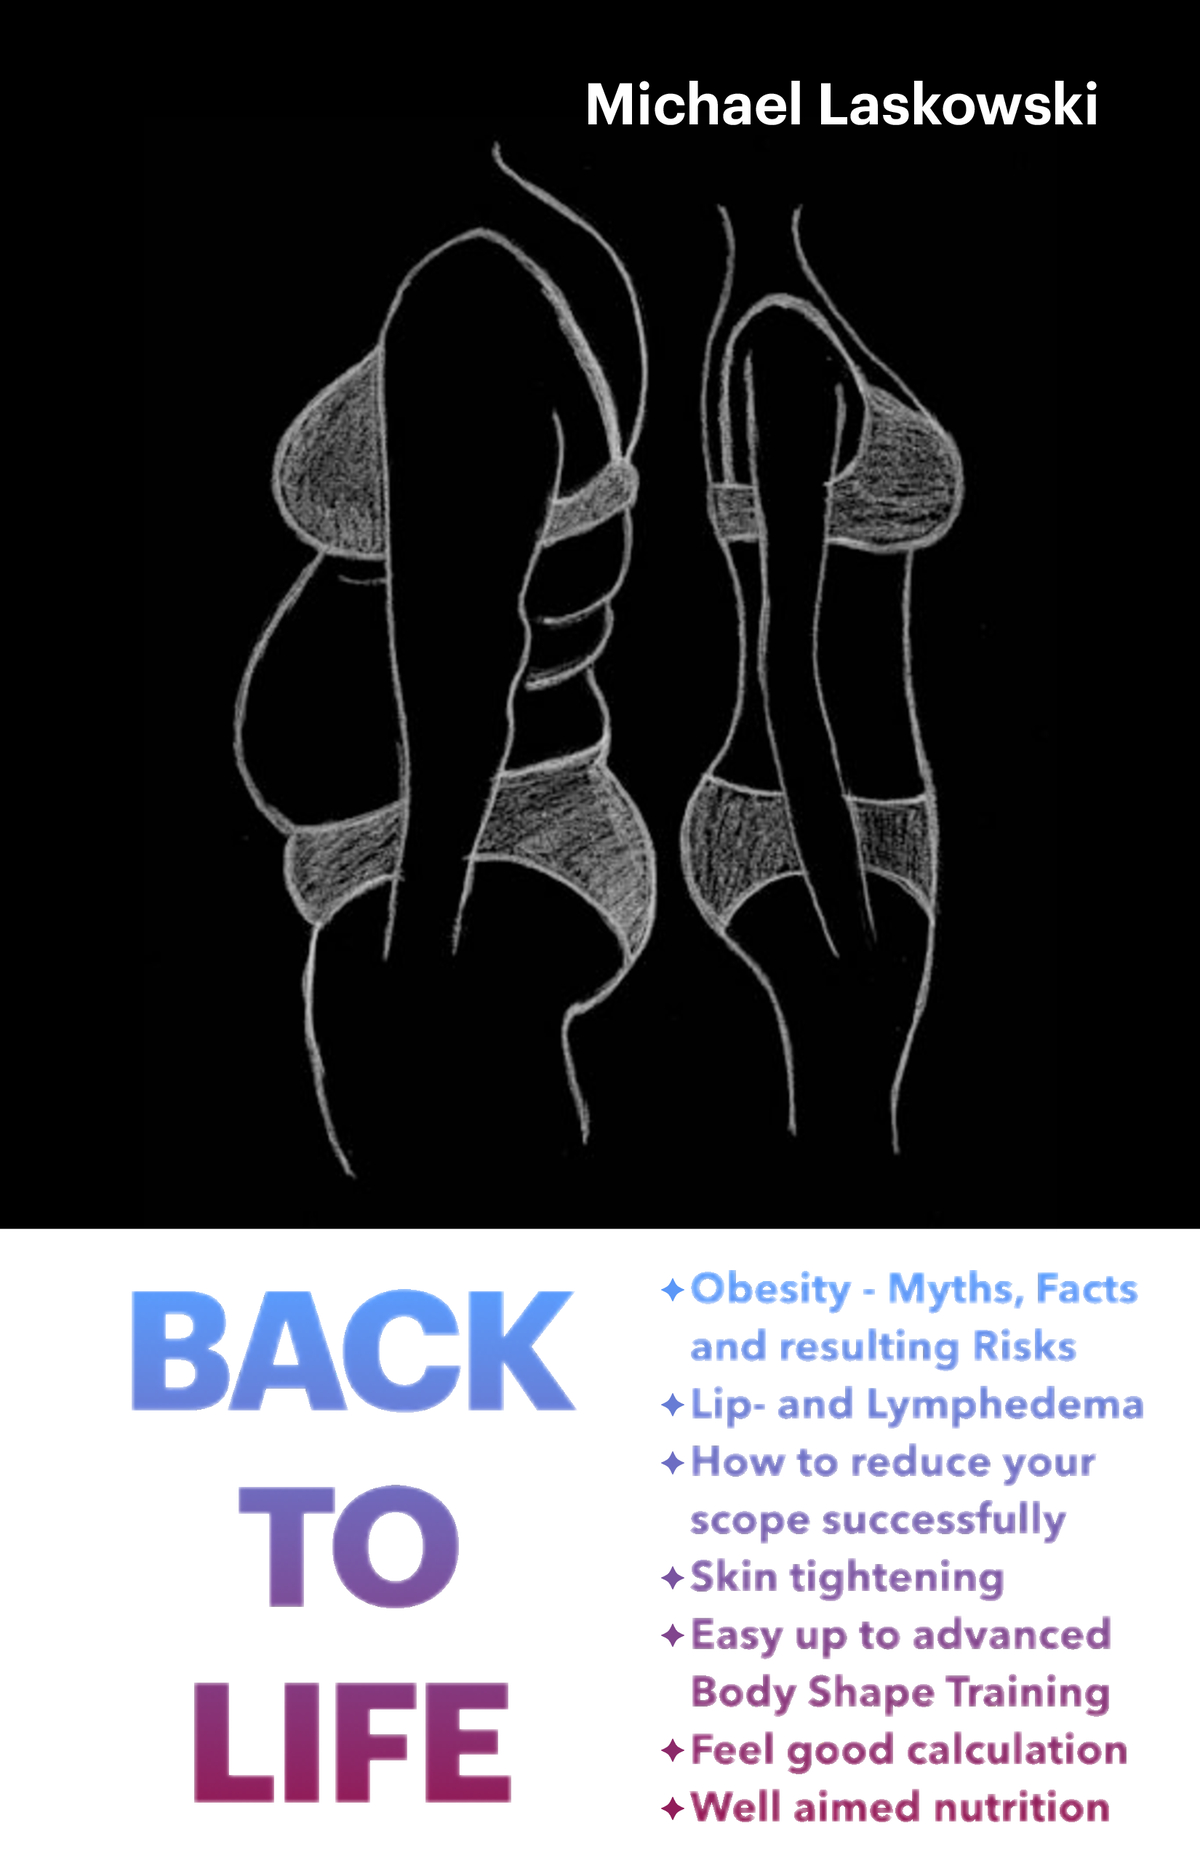 Back to life - Obesity - Myths and Facts